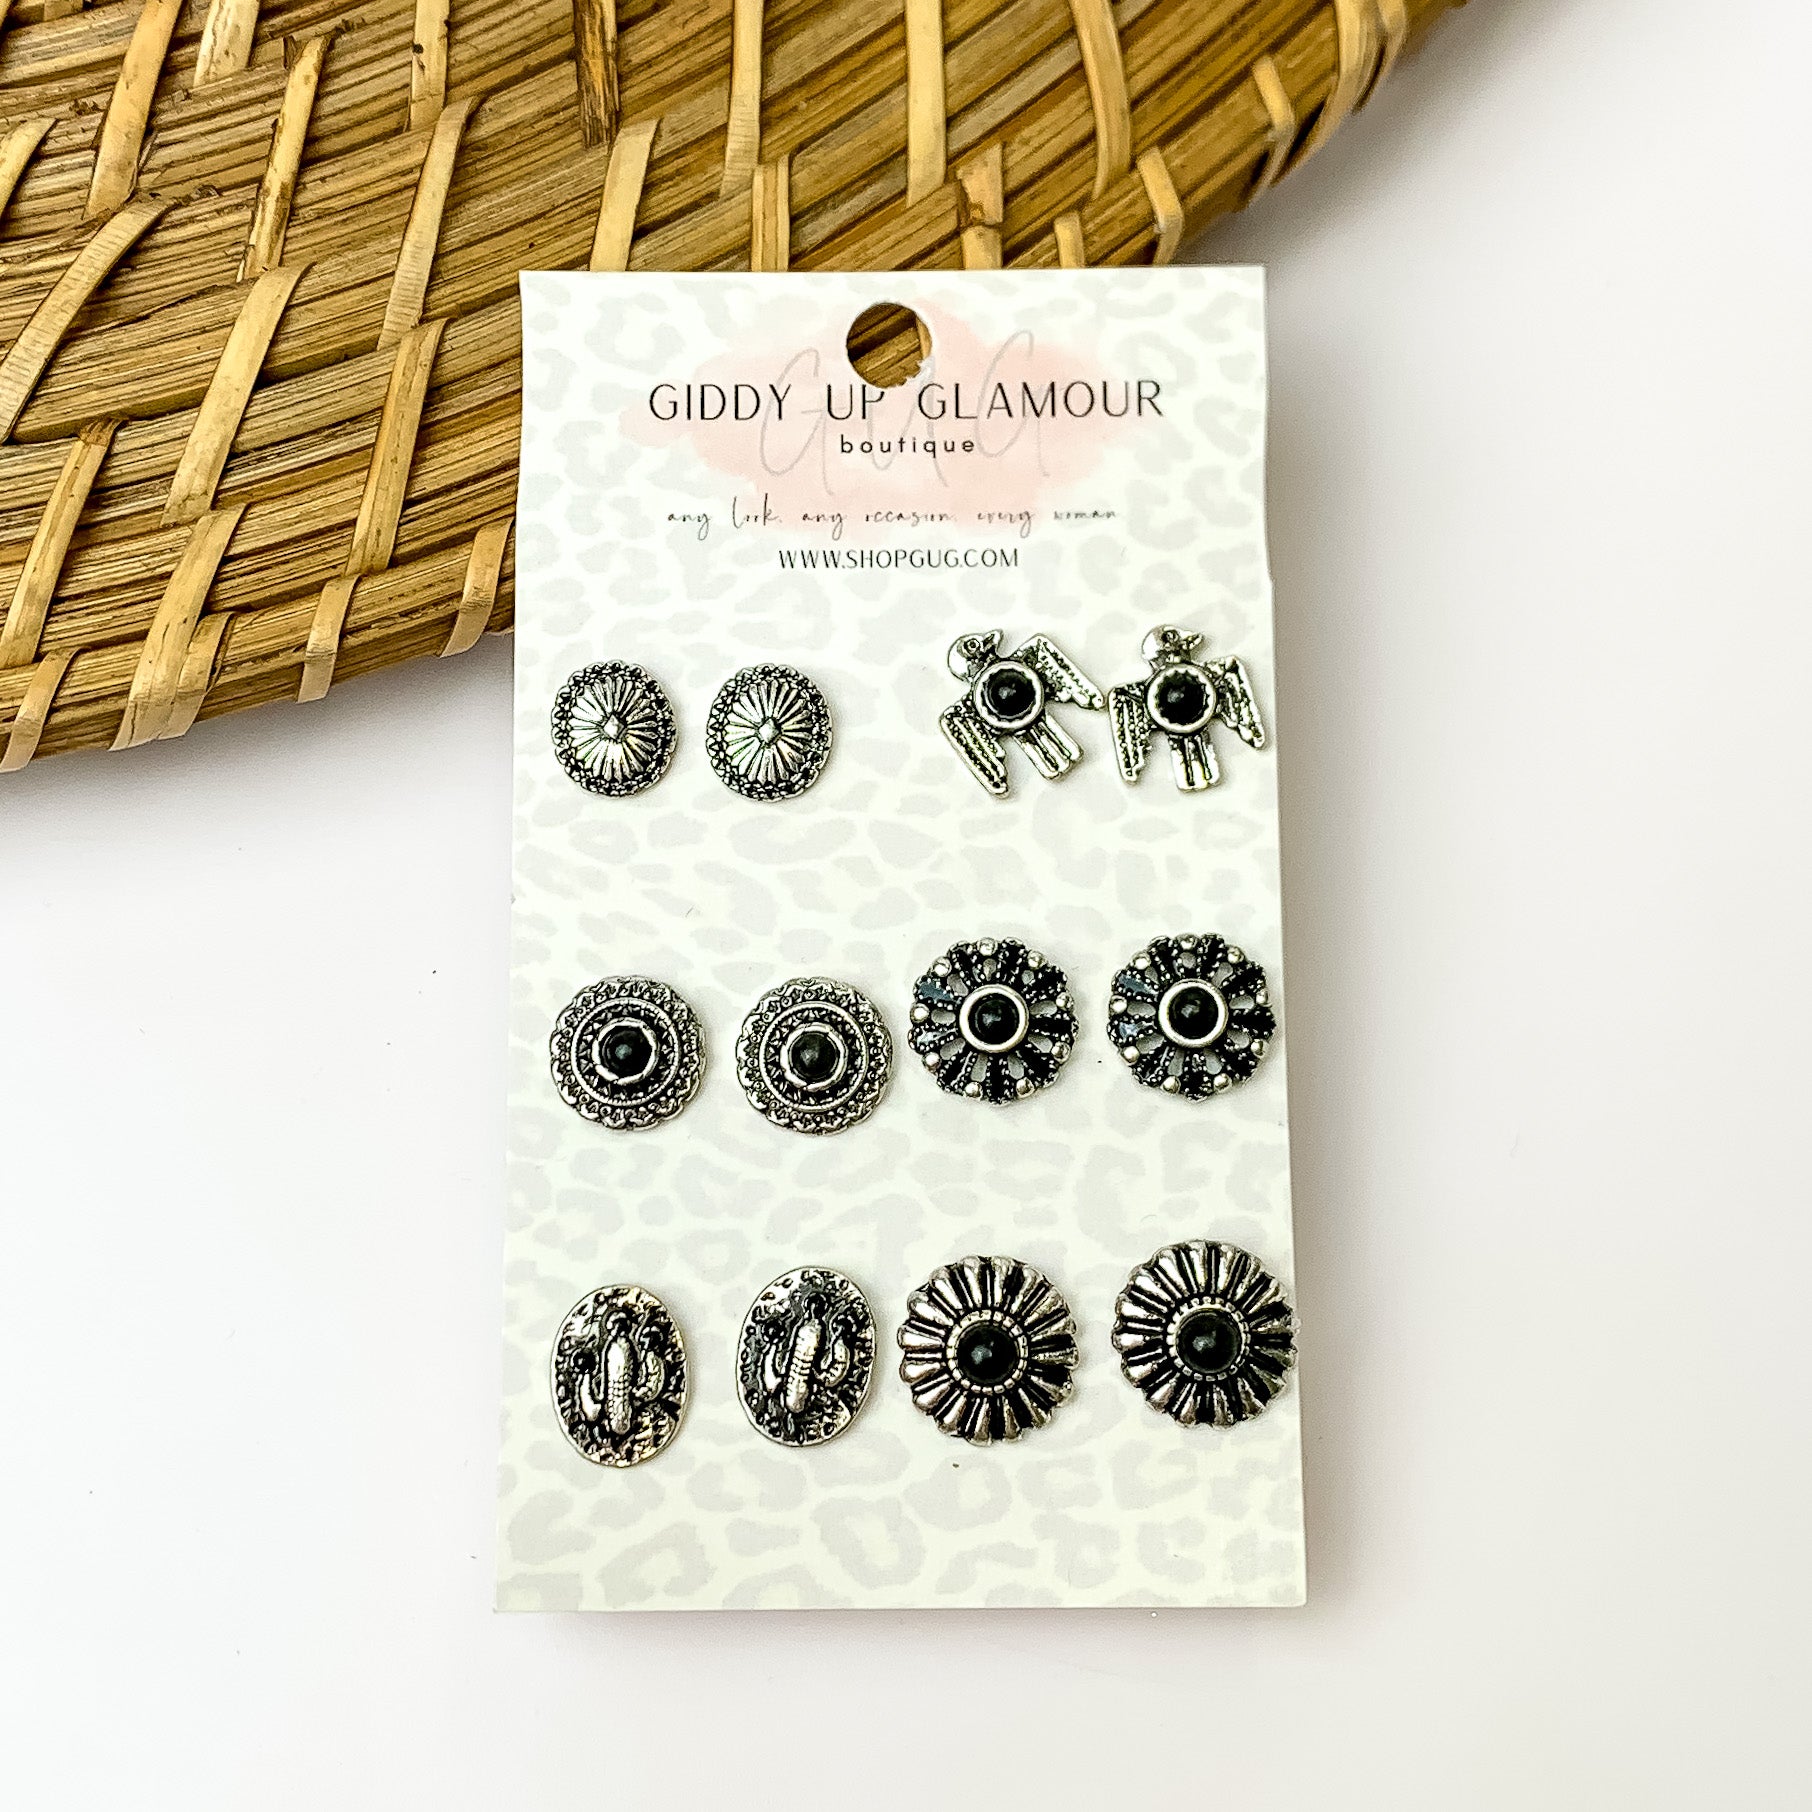 Set of six black and silver stud earrings. Pictured with a white background and a wood like decoration in the top left.